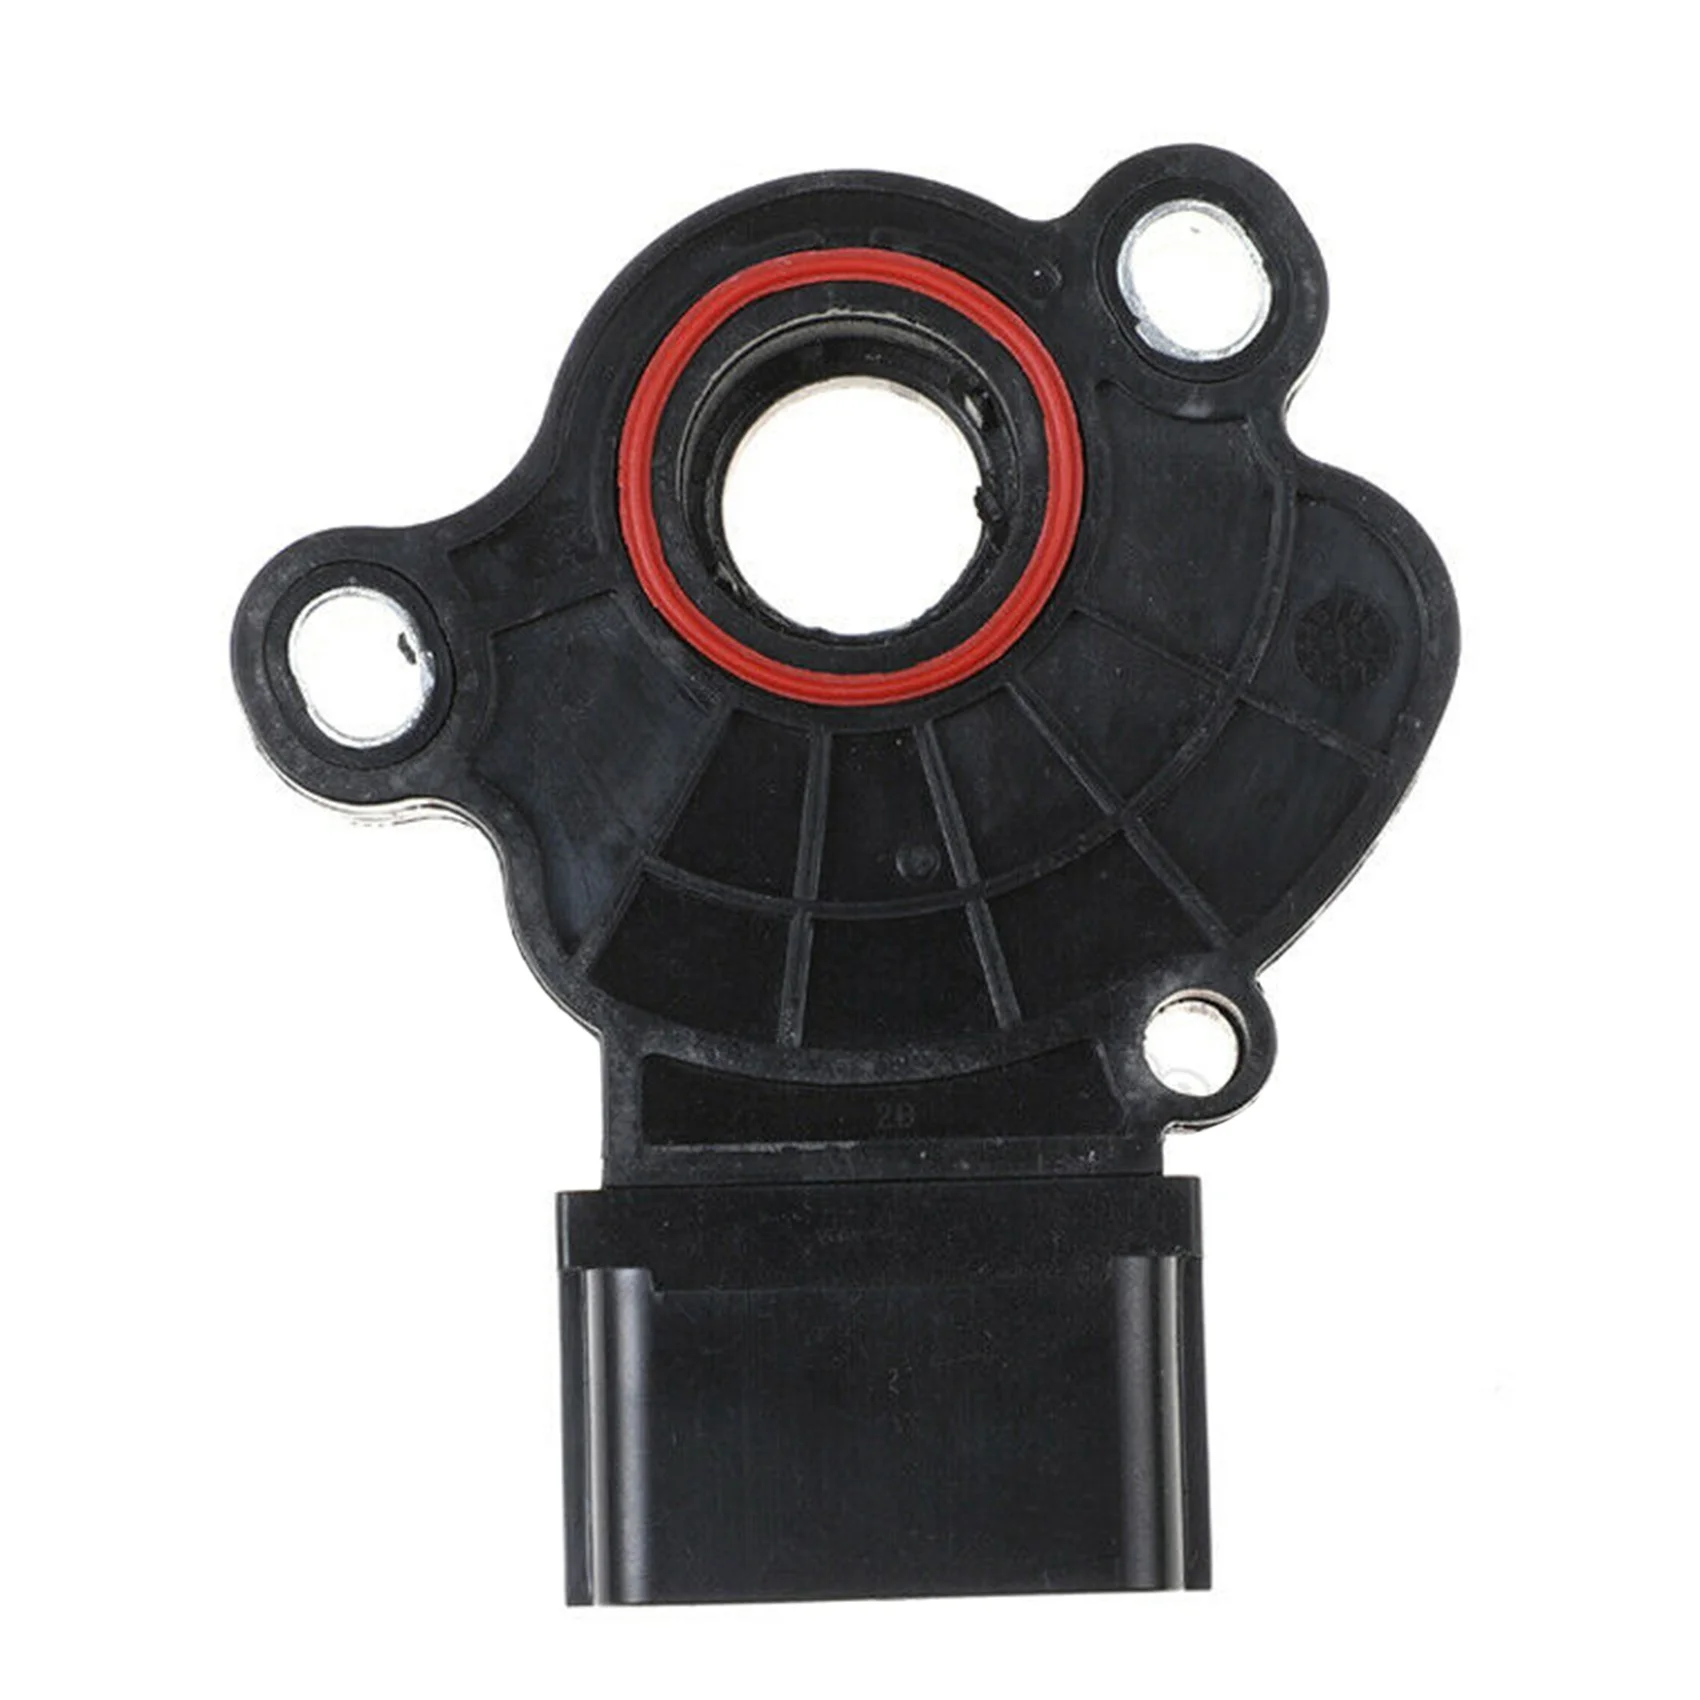 

7S4P-7F293-AA Gearbox Shifting Sensor for 1998 Ford Focus Fiesta 2010 Sensor Switch 7S4P7F293AA 4610018